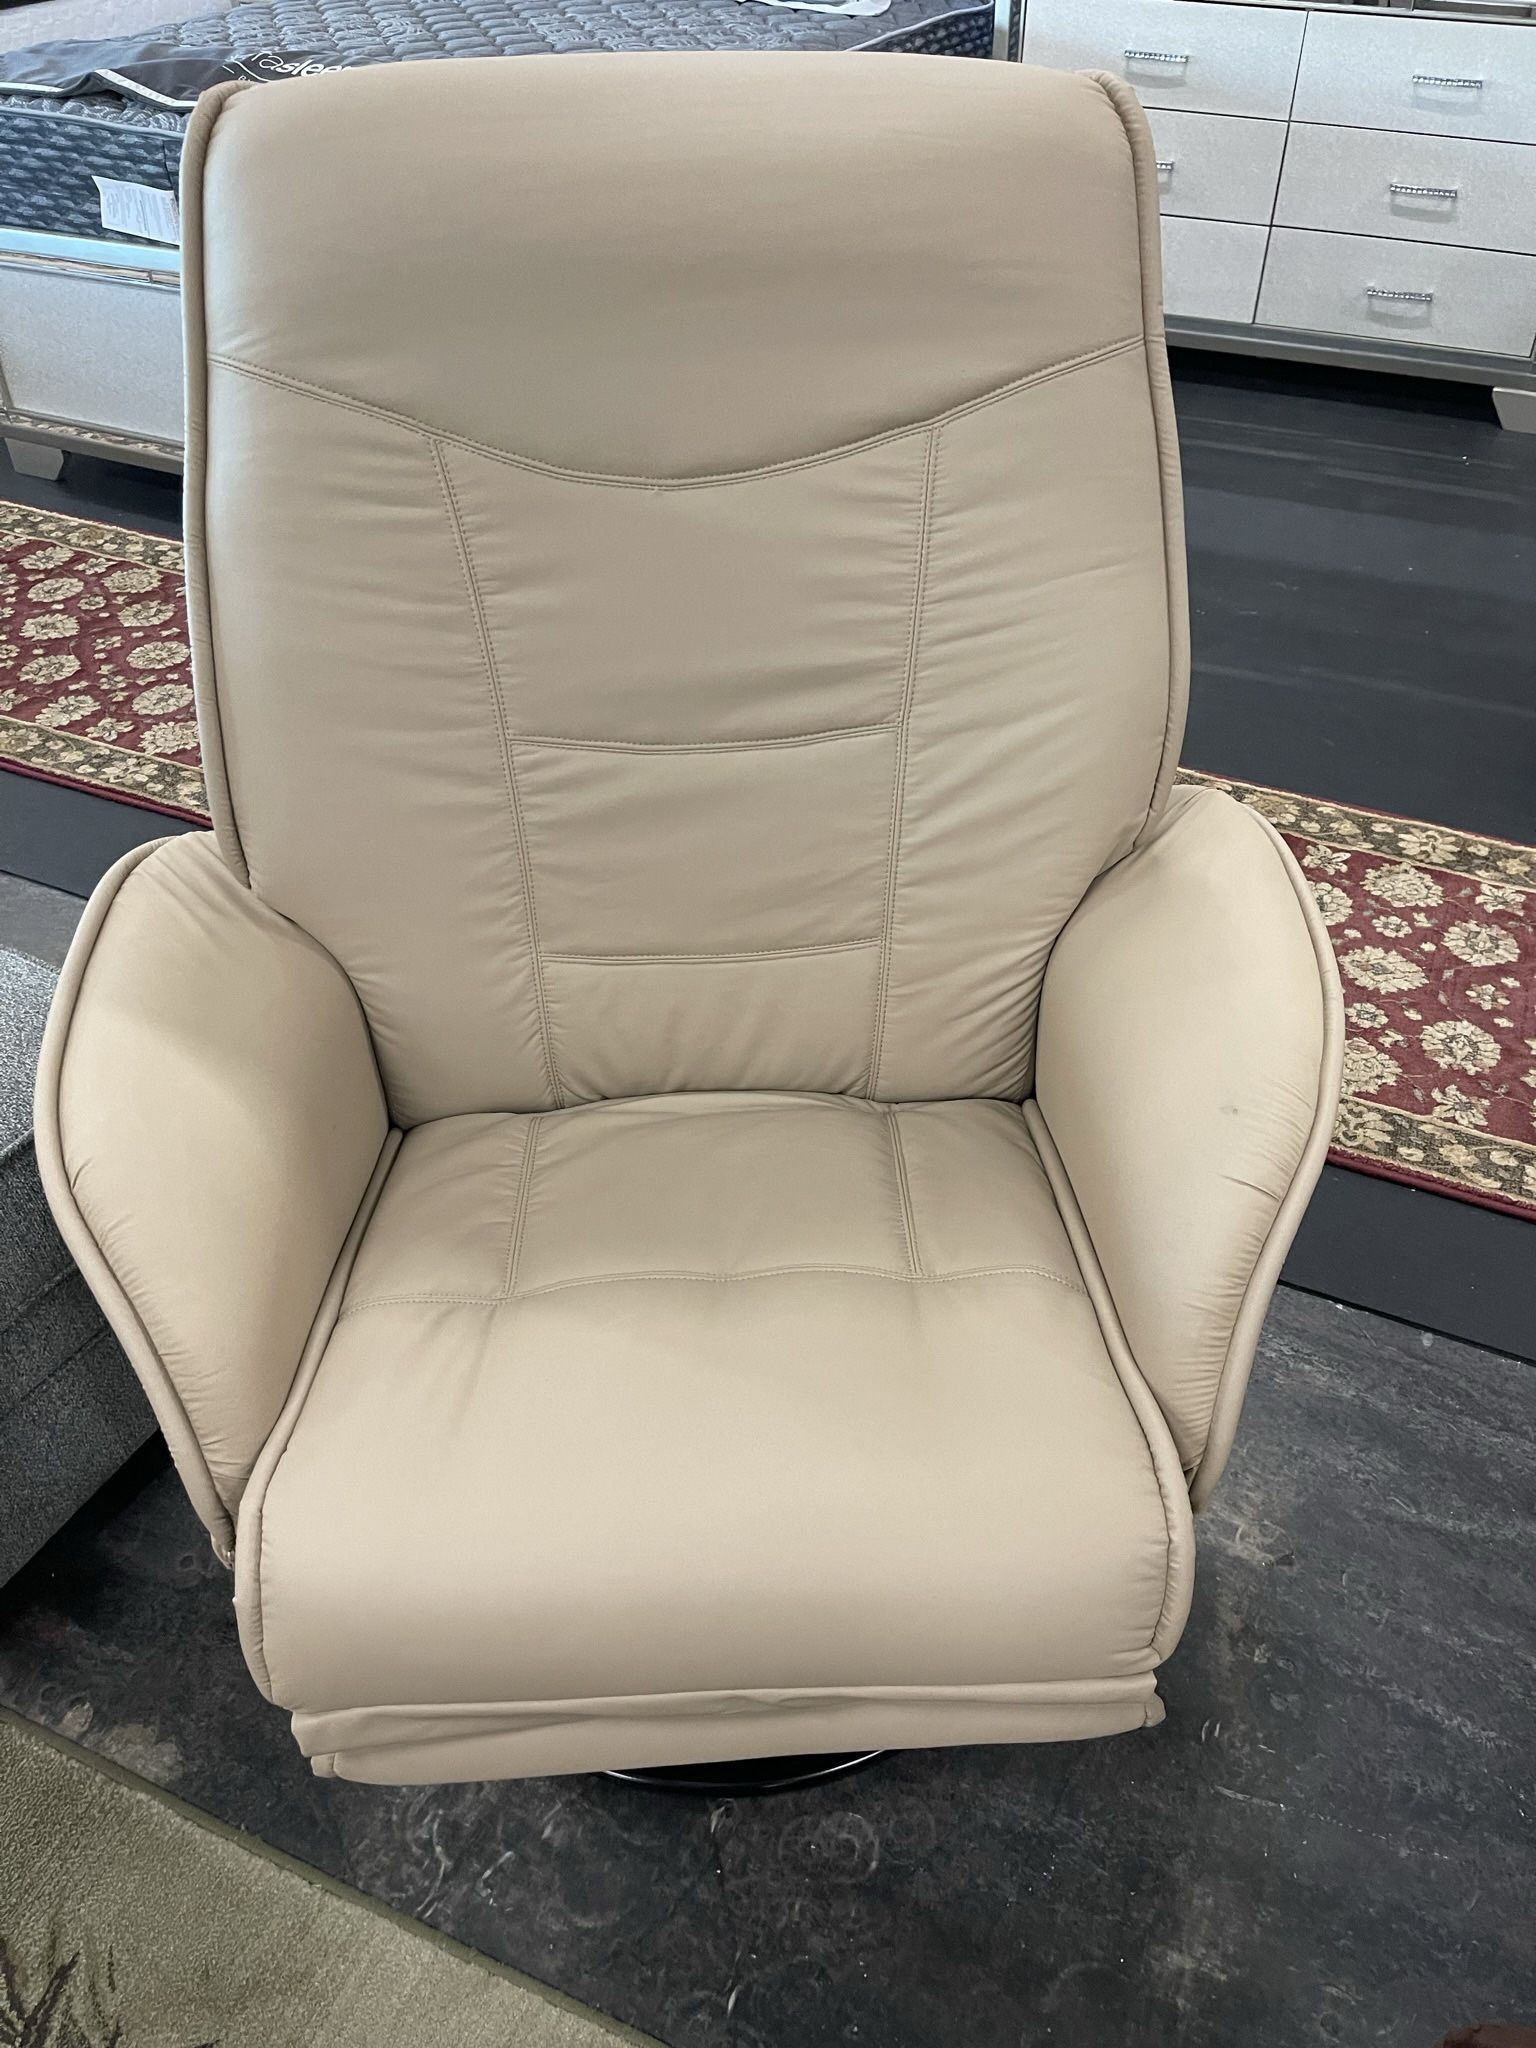 Recliner On Clearance 